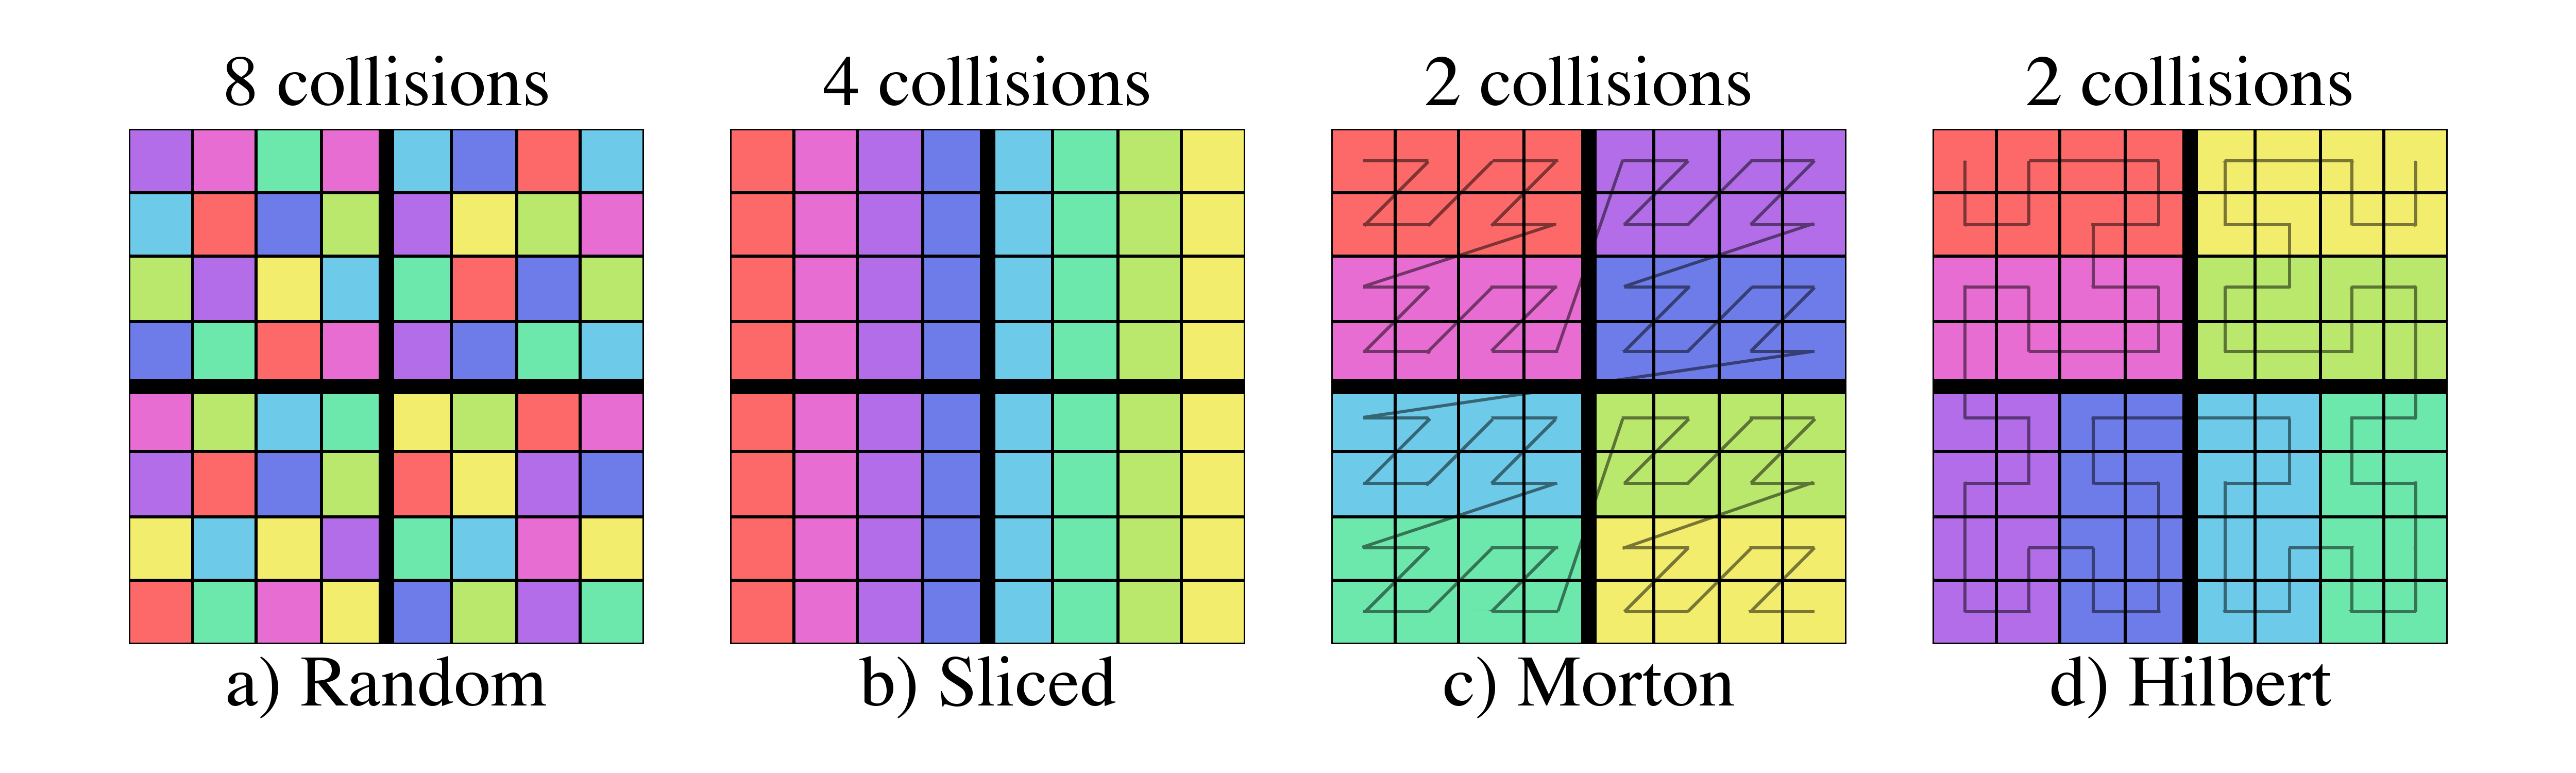 Figure 20: Examples of collisions for four different domain partitioning schemes. The heavy black lines denote 1st order Morton cells. The presence of more that one file (color) within a Morton cell indicates a collision. NOTE: from an accessibility standpoint, I must note that using a smooth color gradient may be counter productive for colorblind readers as it makes it a lot harder to perveice that neighbouring regions belong to different files.